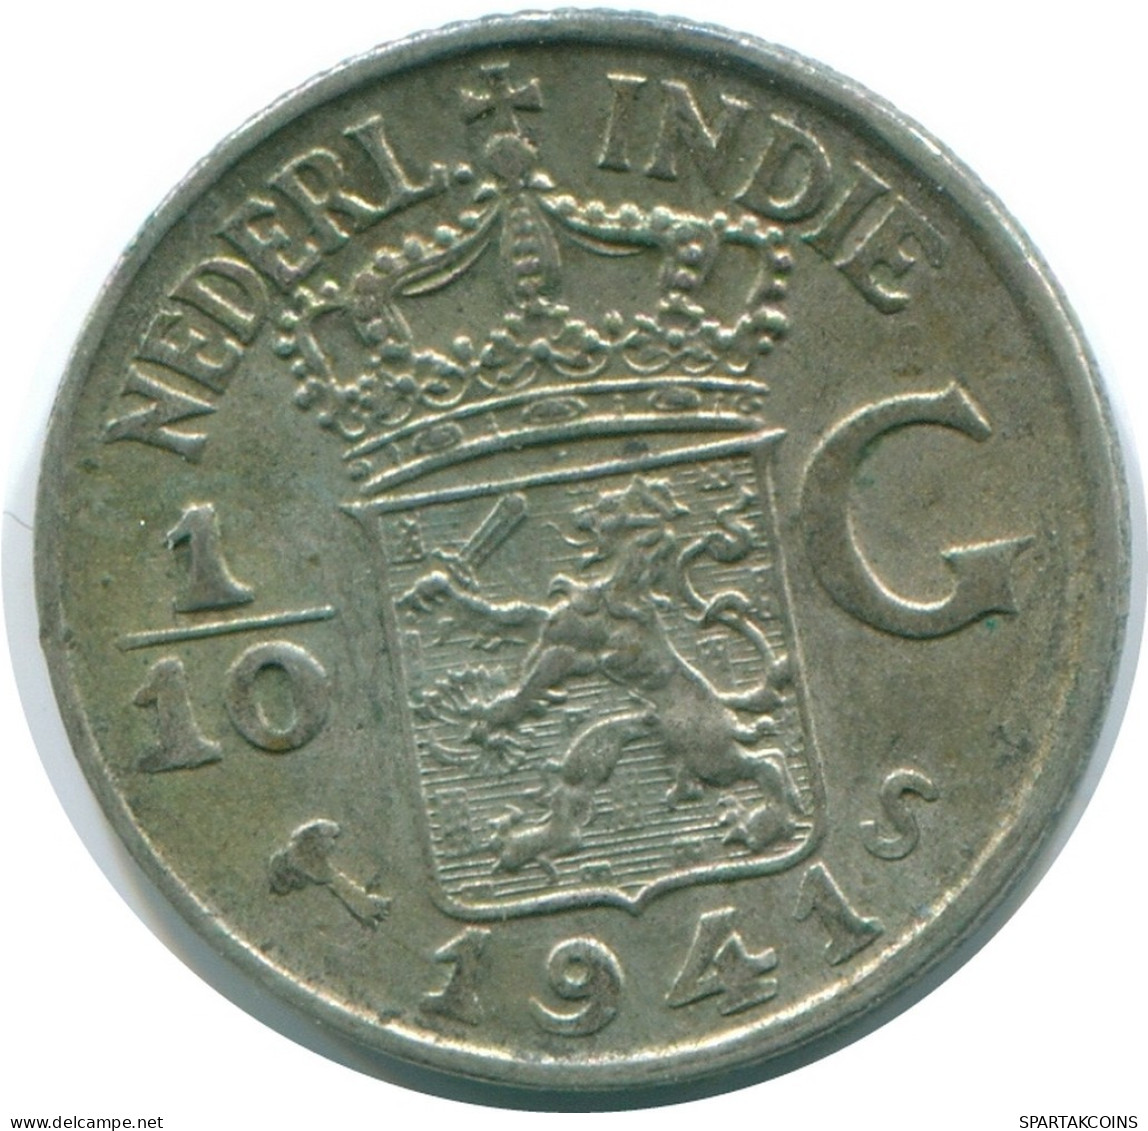 1/10 GULDEN 1941 S NETHERLANDS EAST INDIES SILVER Colonial Coin #NL13760.3.U.A - Dutch East Indies